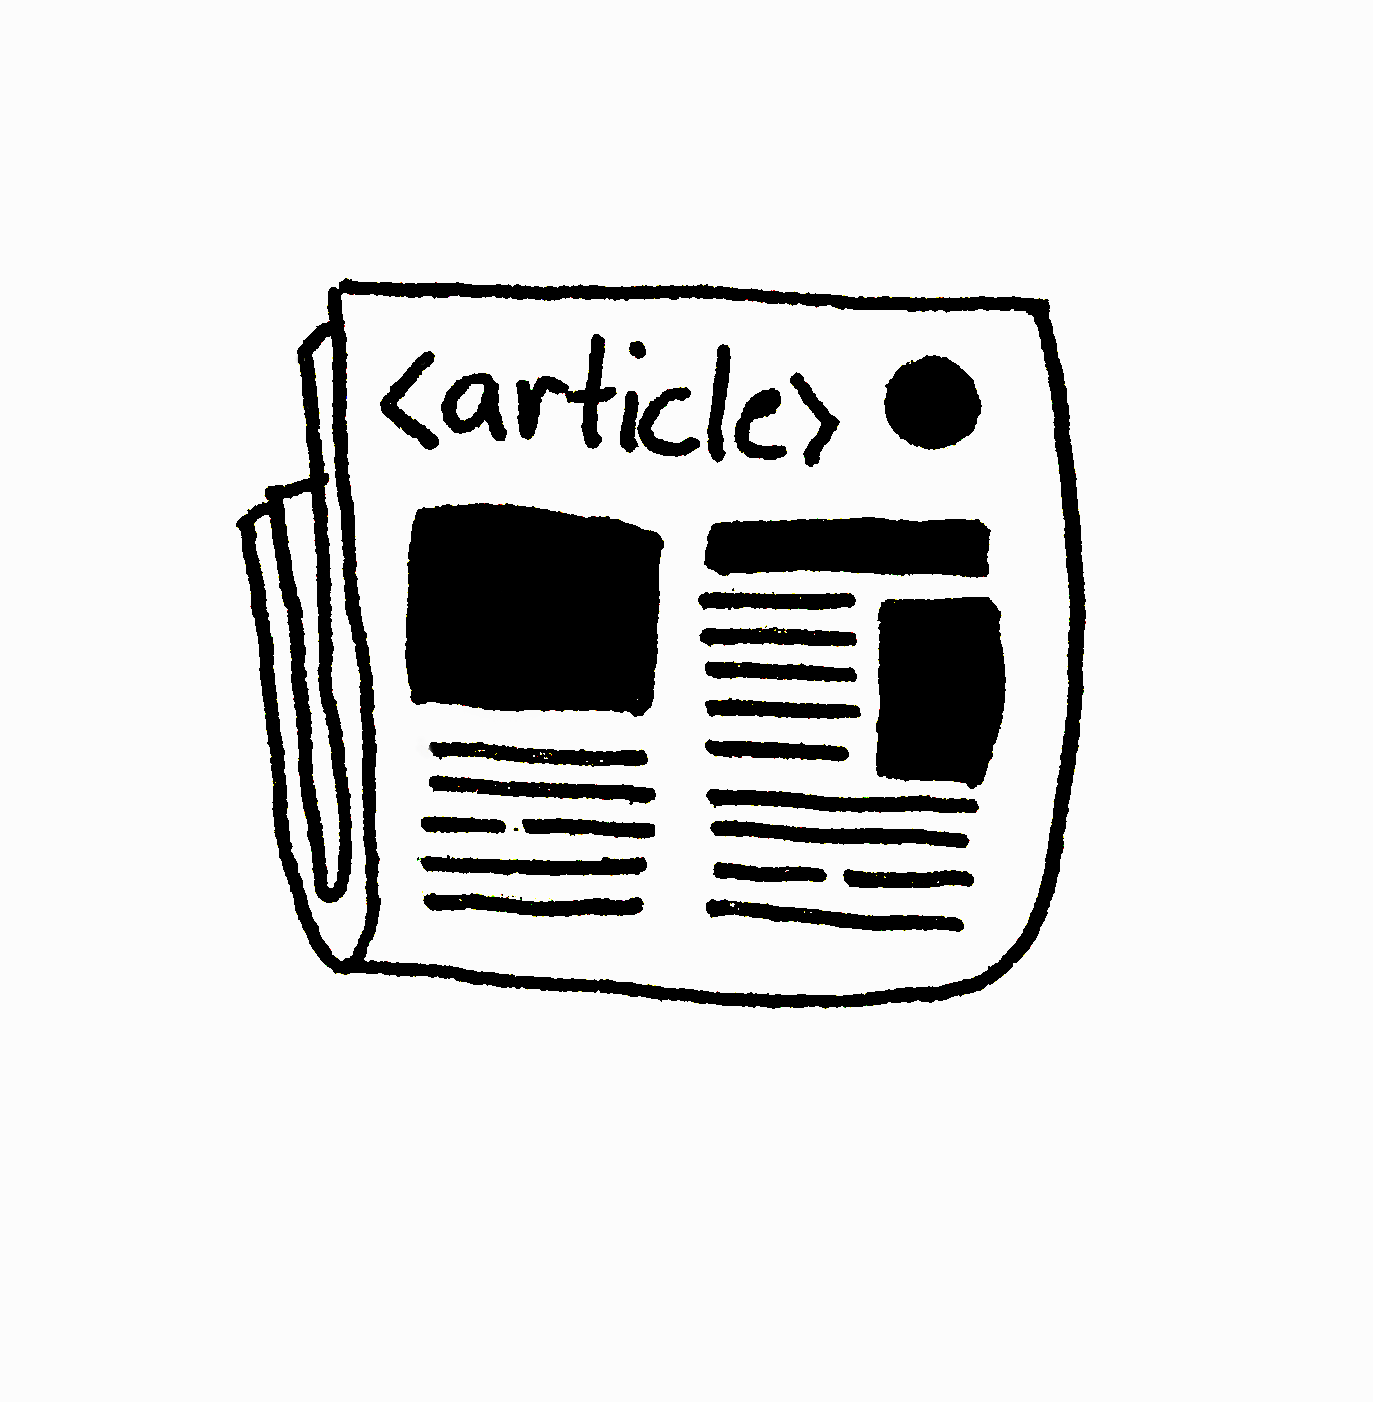 An illustration of a newspaper with the text '<article>' written as the headline